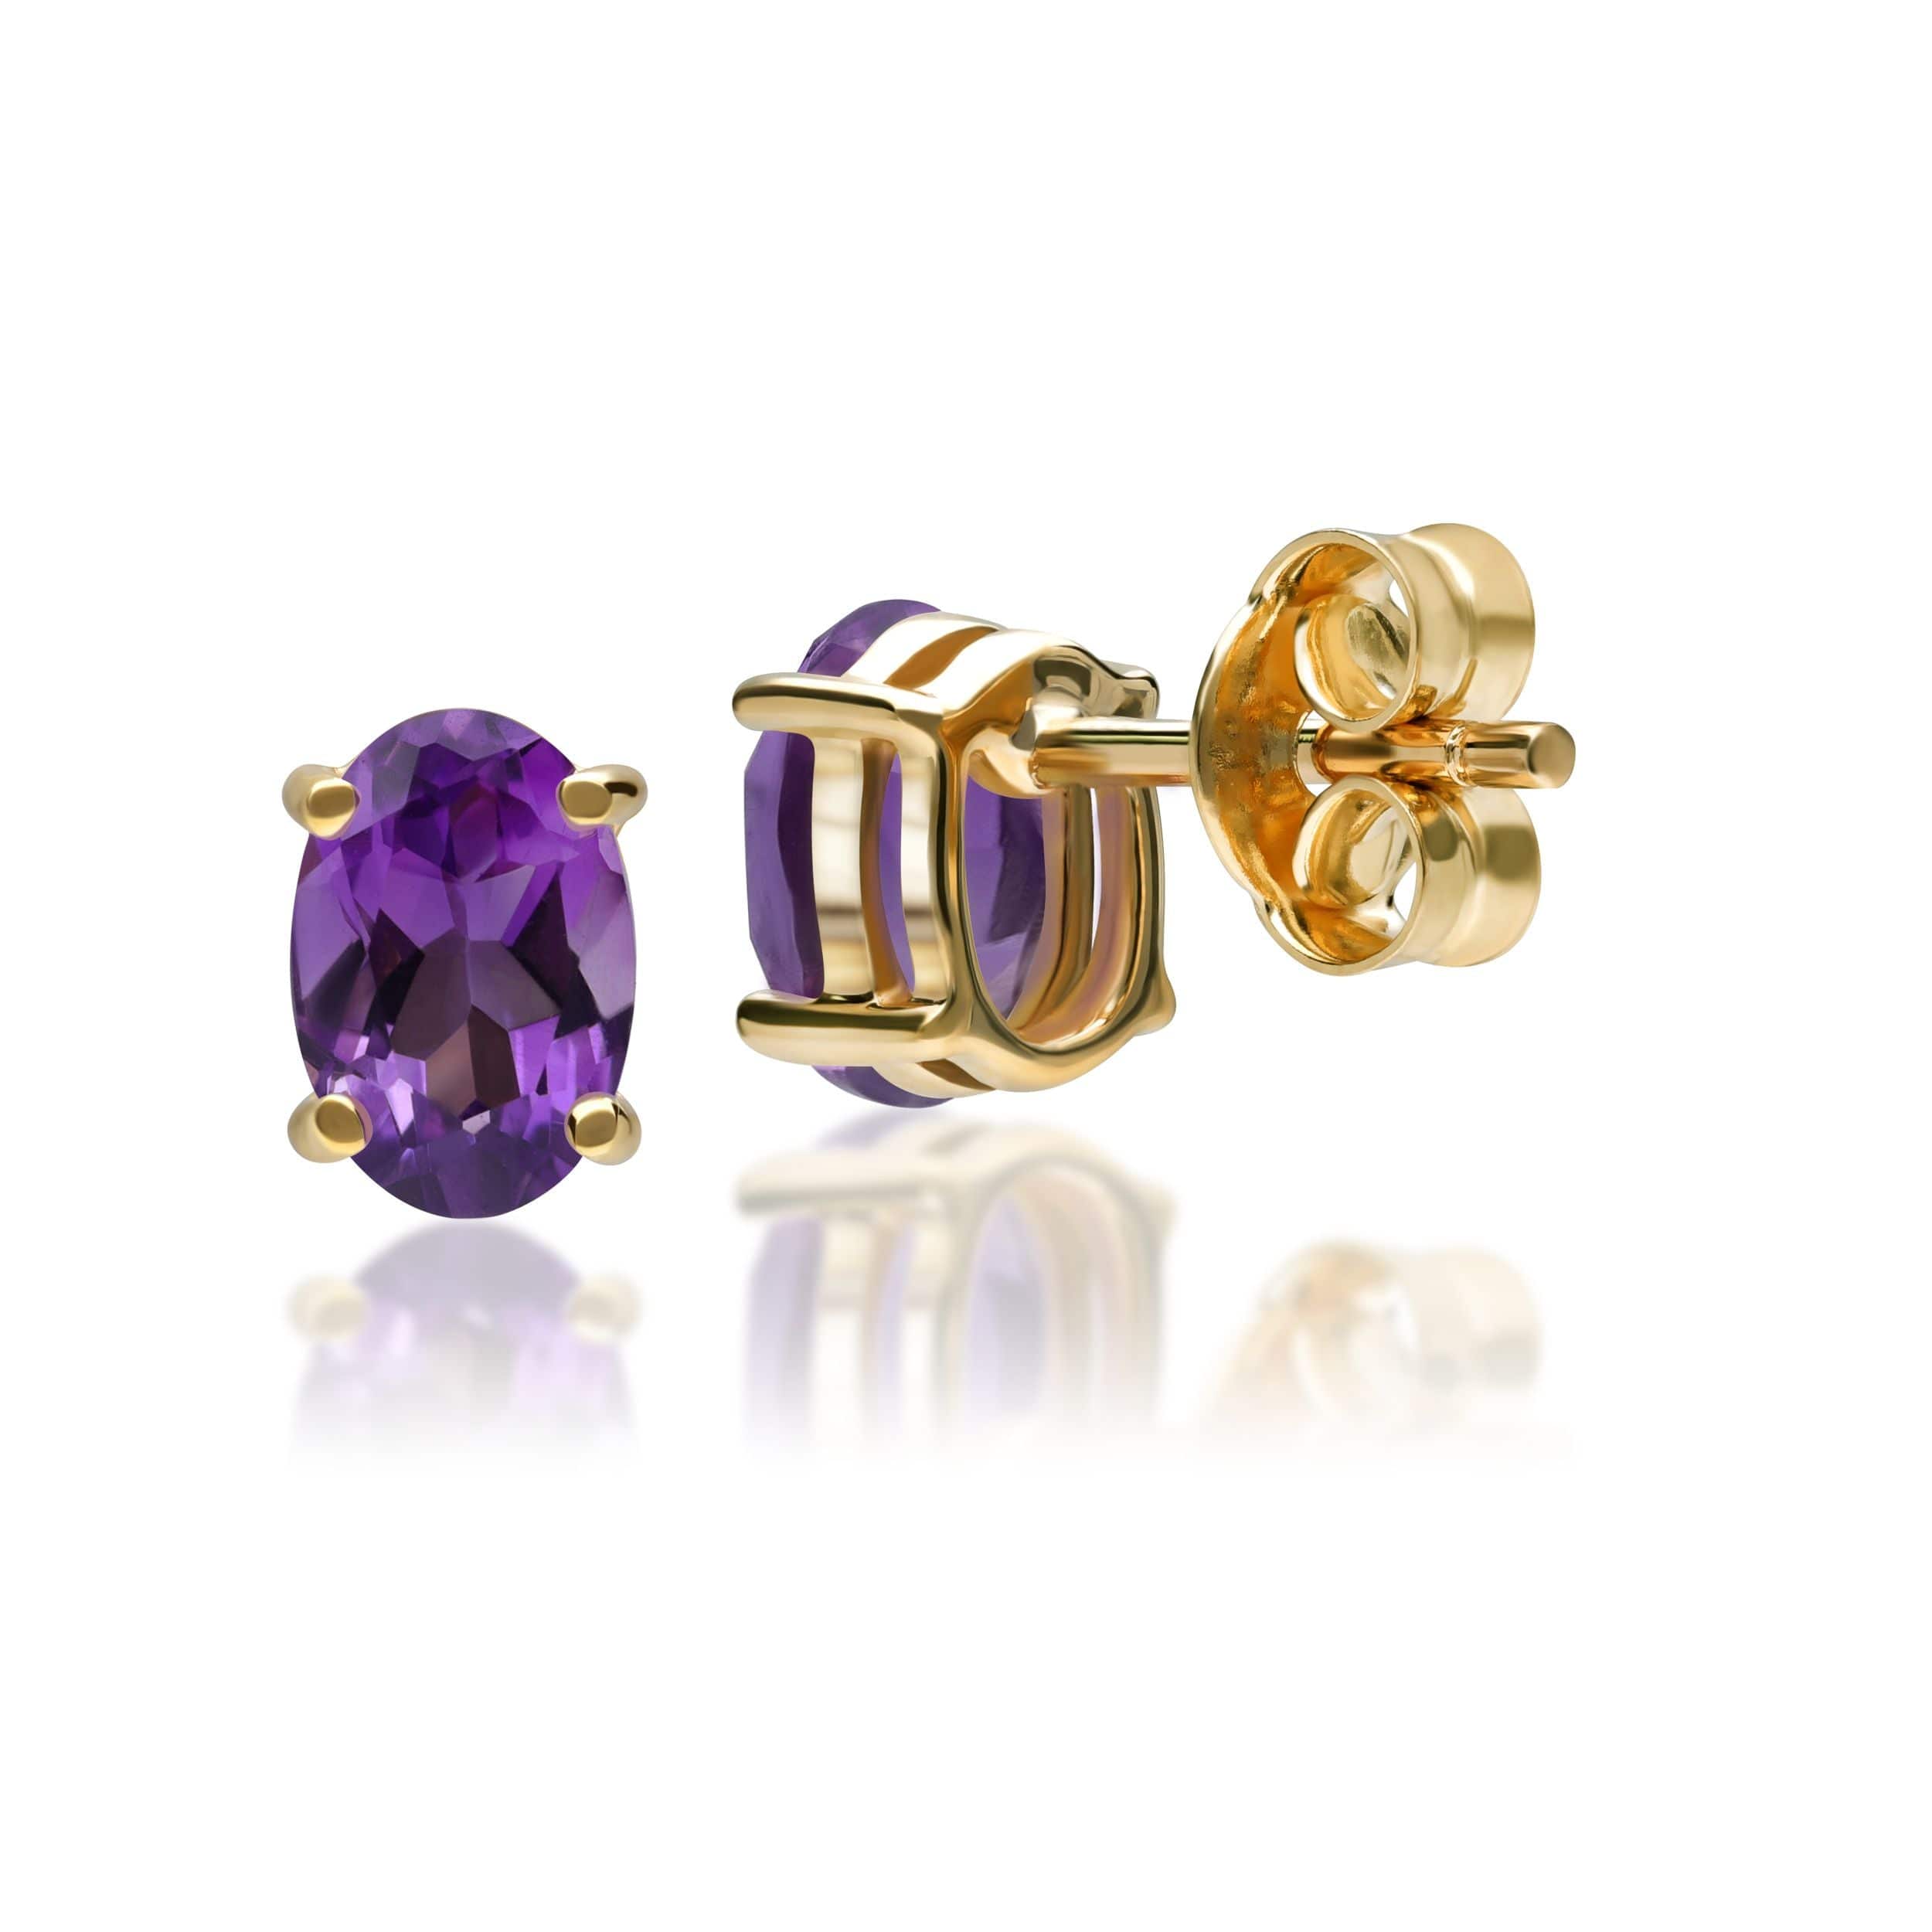 10243 Classic Oval Amethyst Stud Earrings in 9ct Yellow Gold 2